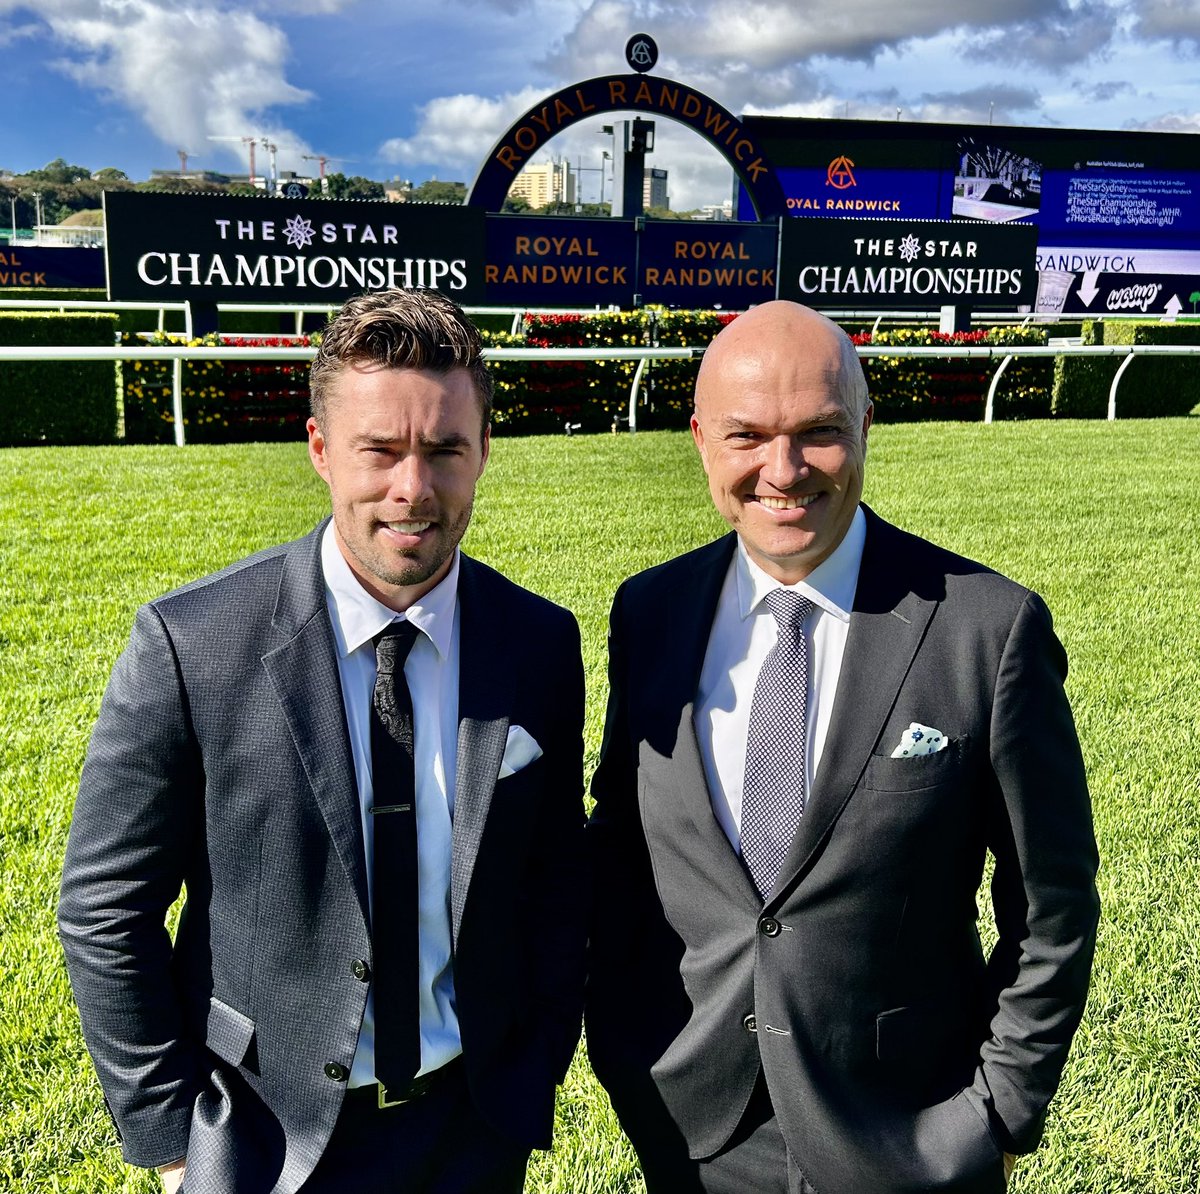 Ready to rock n roll day 1 of @ChampionshipsRR @royalrandwick @aus_turf_club with @FanDuel @mrdubbsie @Michael_Wrona @TVG @SkyRacingWorld Track recovering amazingly well after all the rain. Quality racing, great betting opportunities 🐎☀️@SkyRacingAU